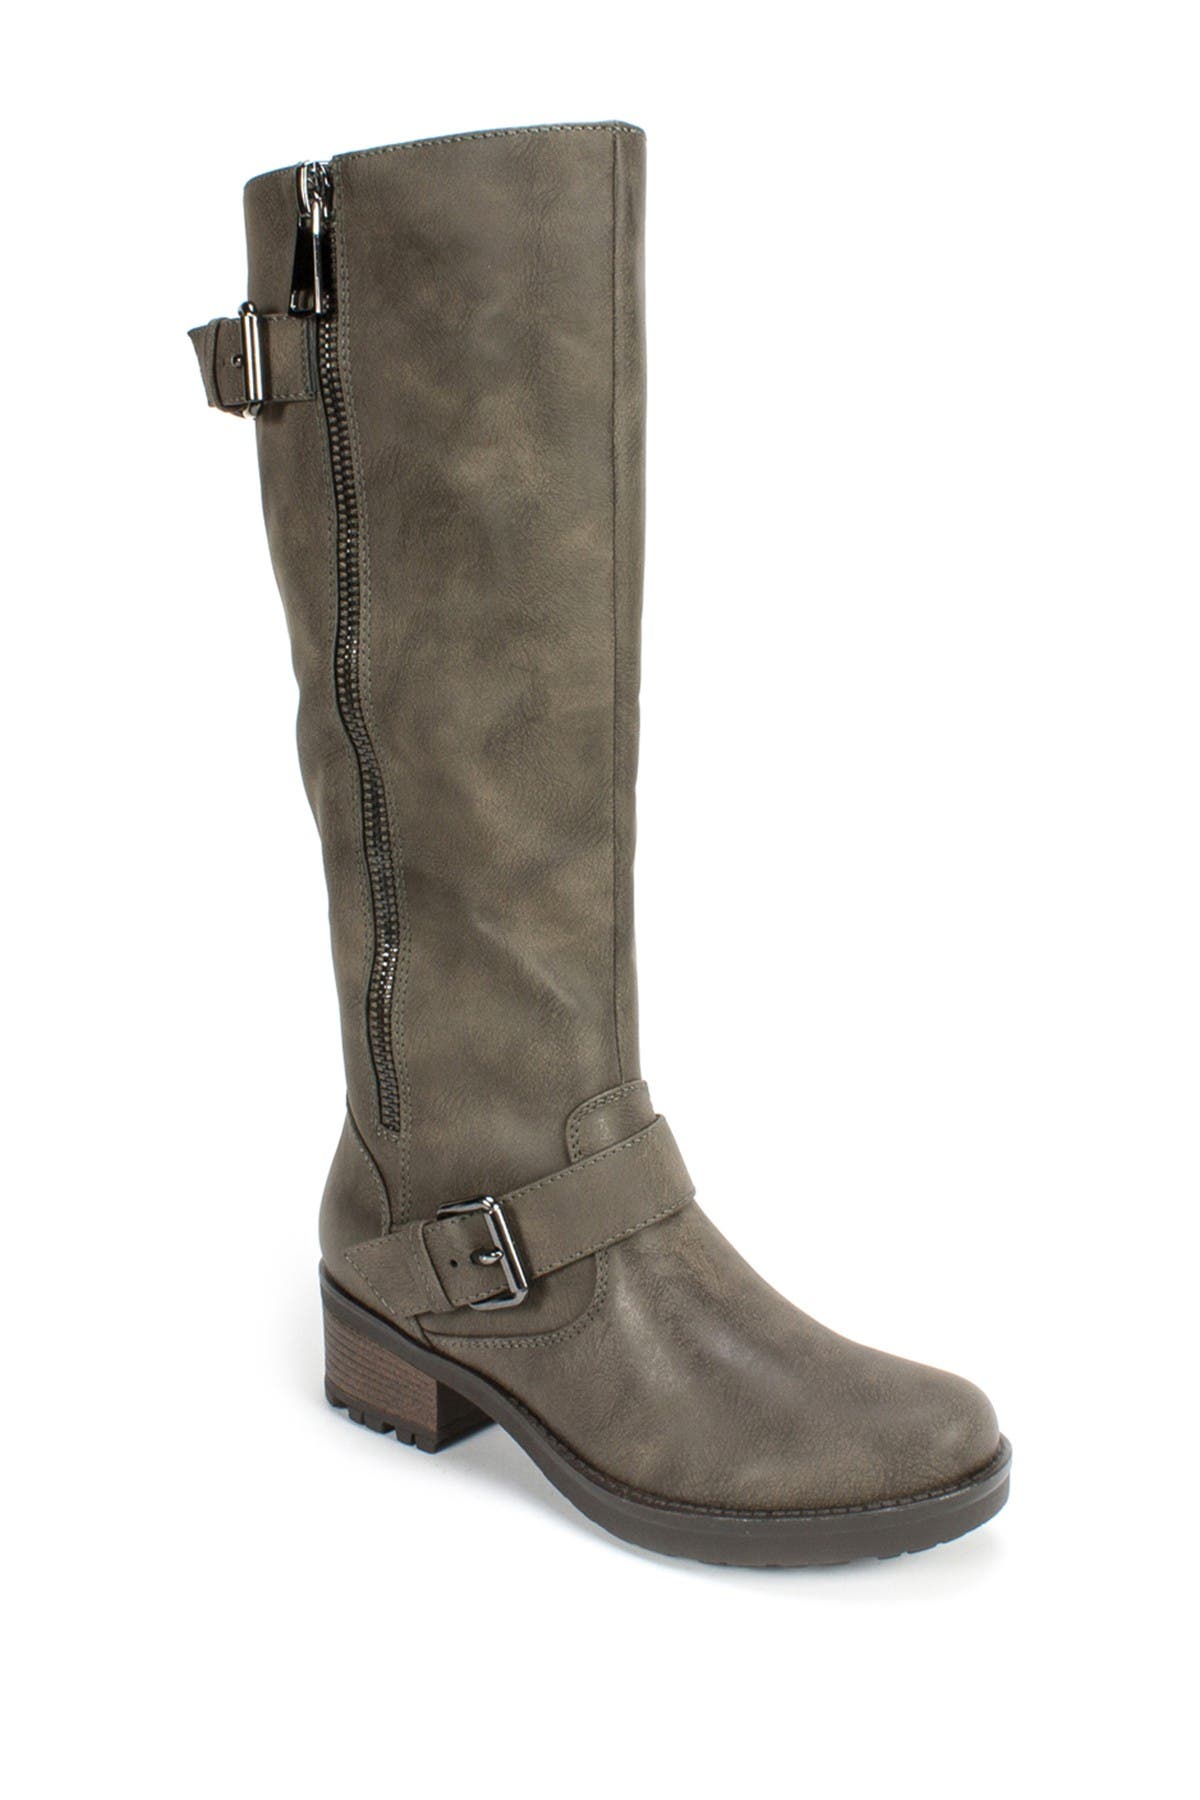 Blackbird Faux Leather Riding Boot 